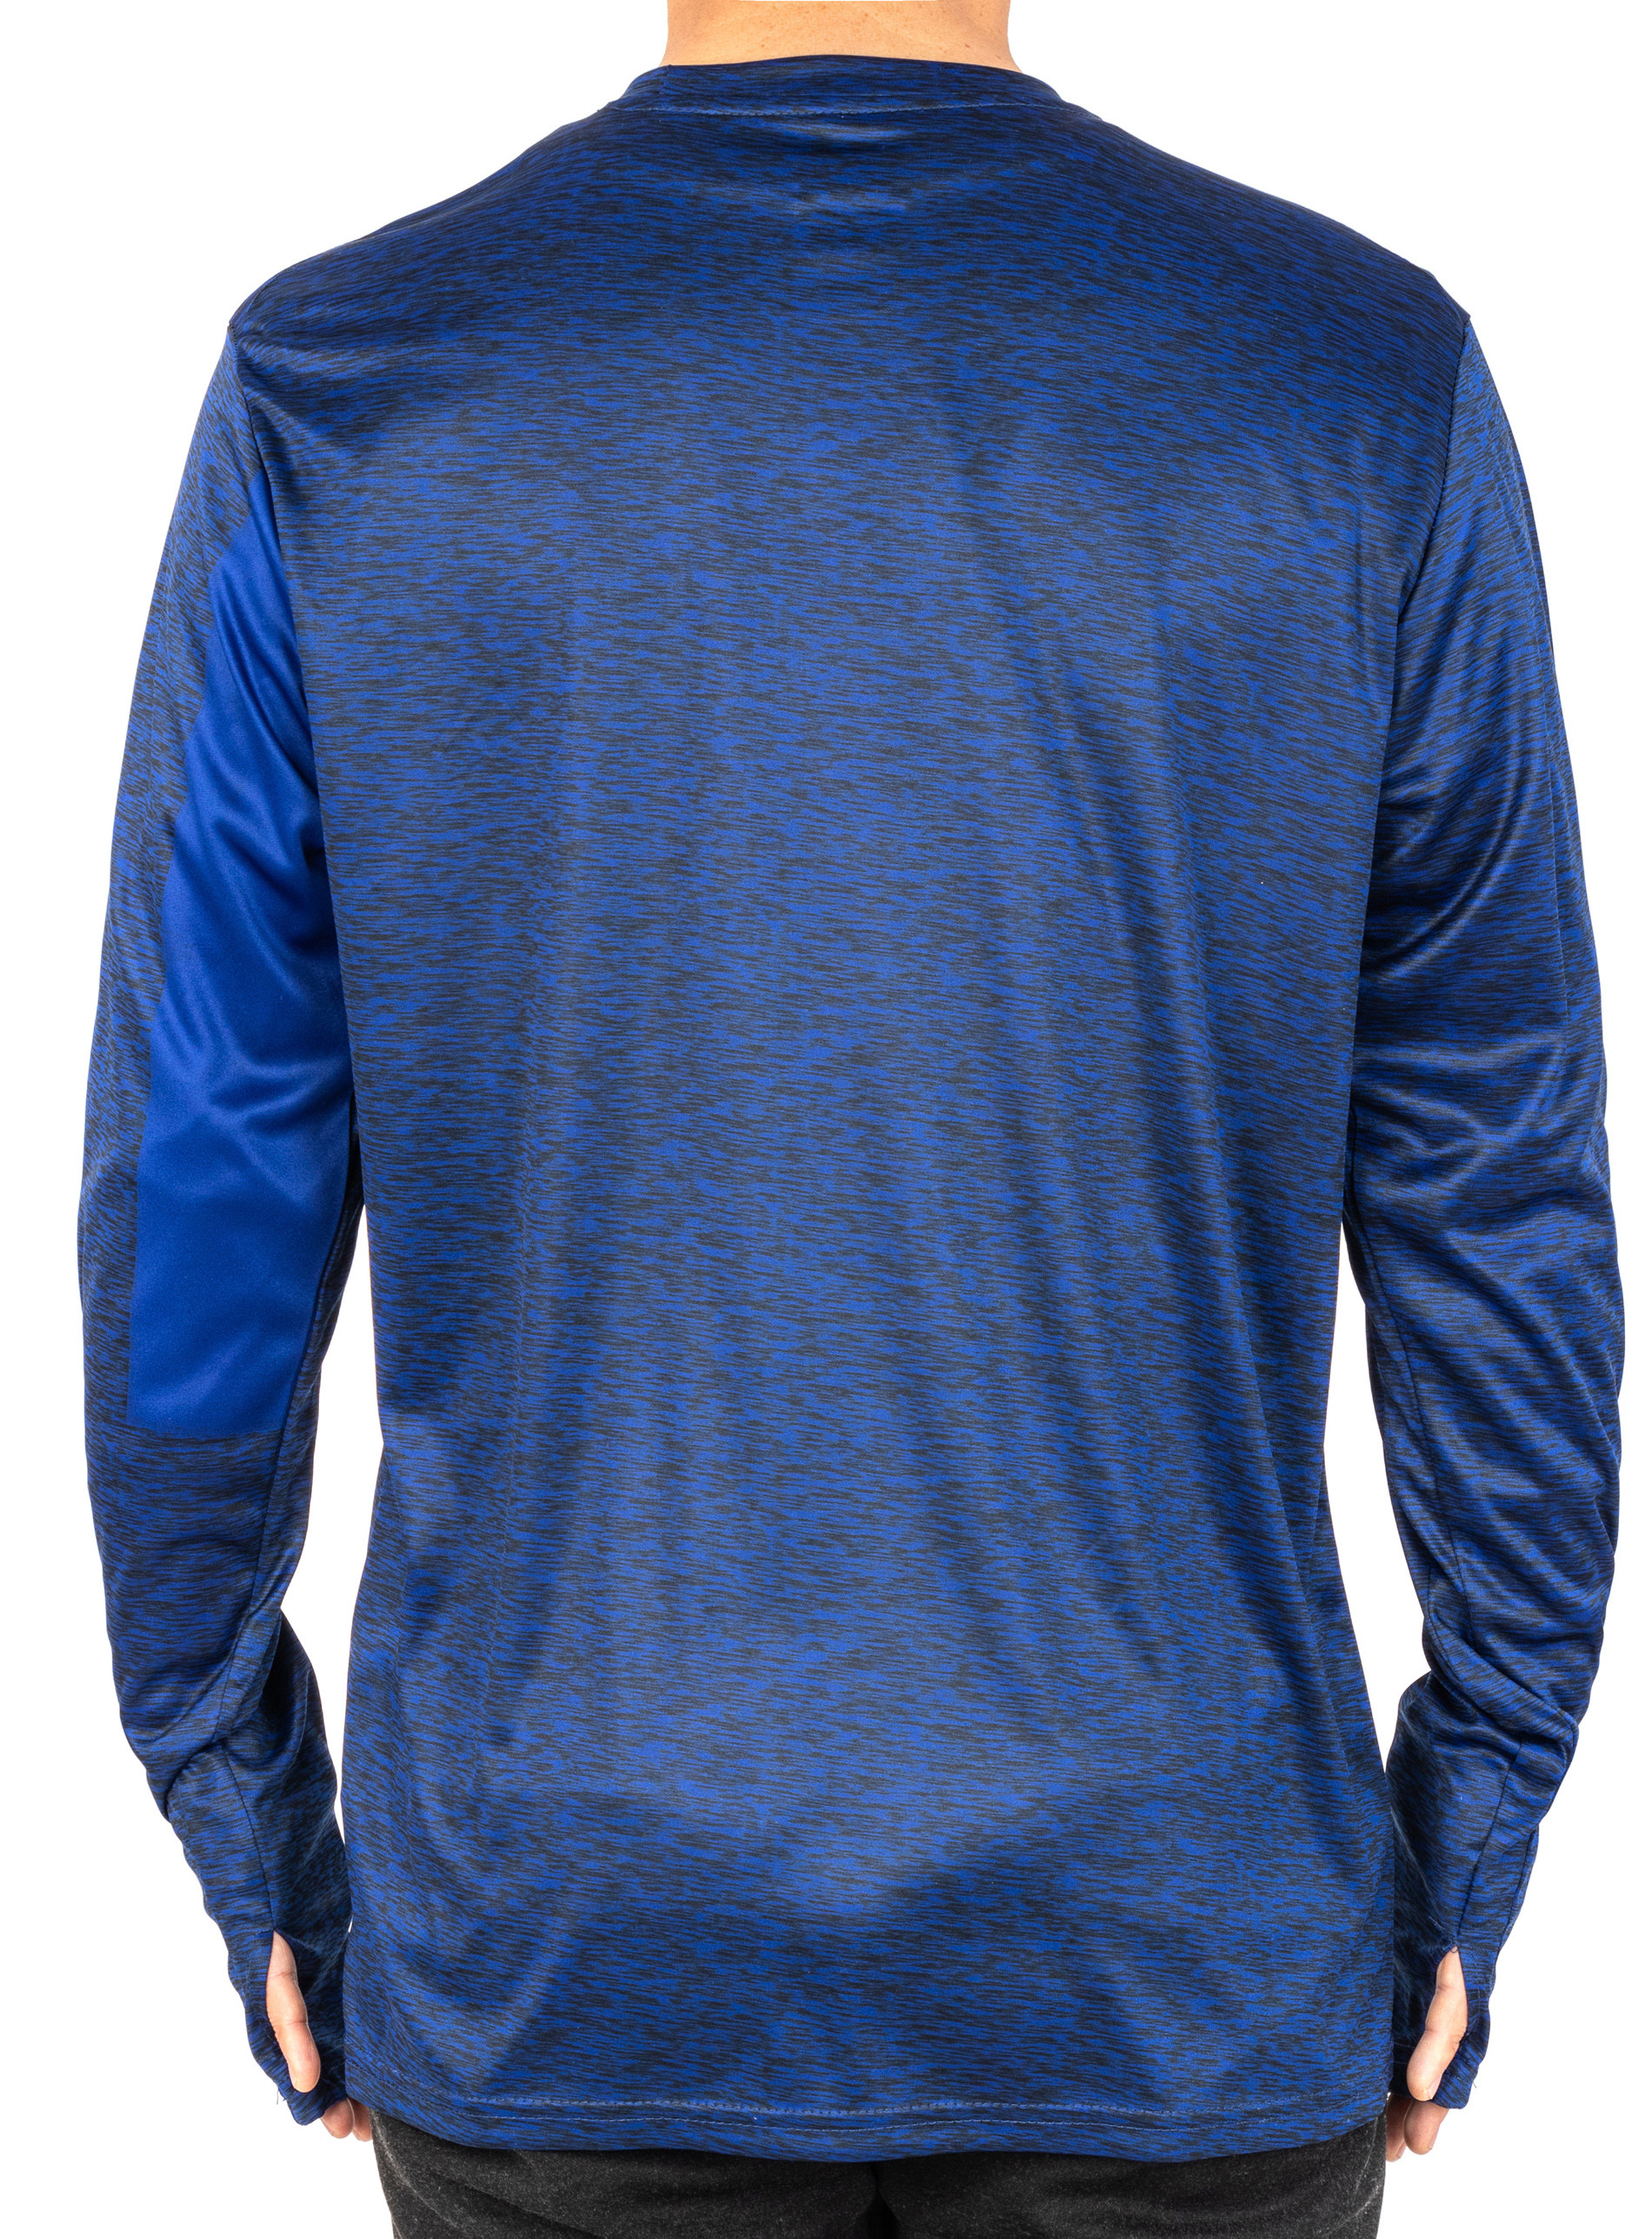 Quality Casual Type Knitting Interlock Fabric Long Sleeve Tshirt With Finger Hole for sale